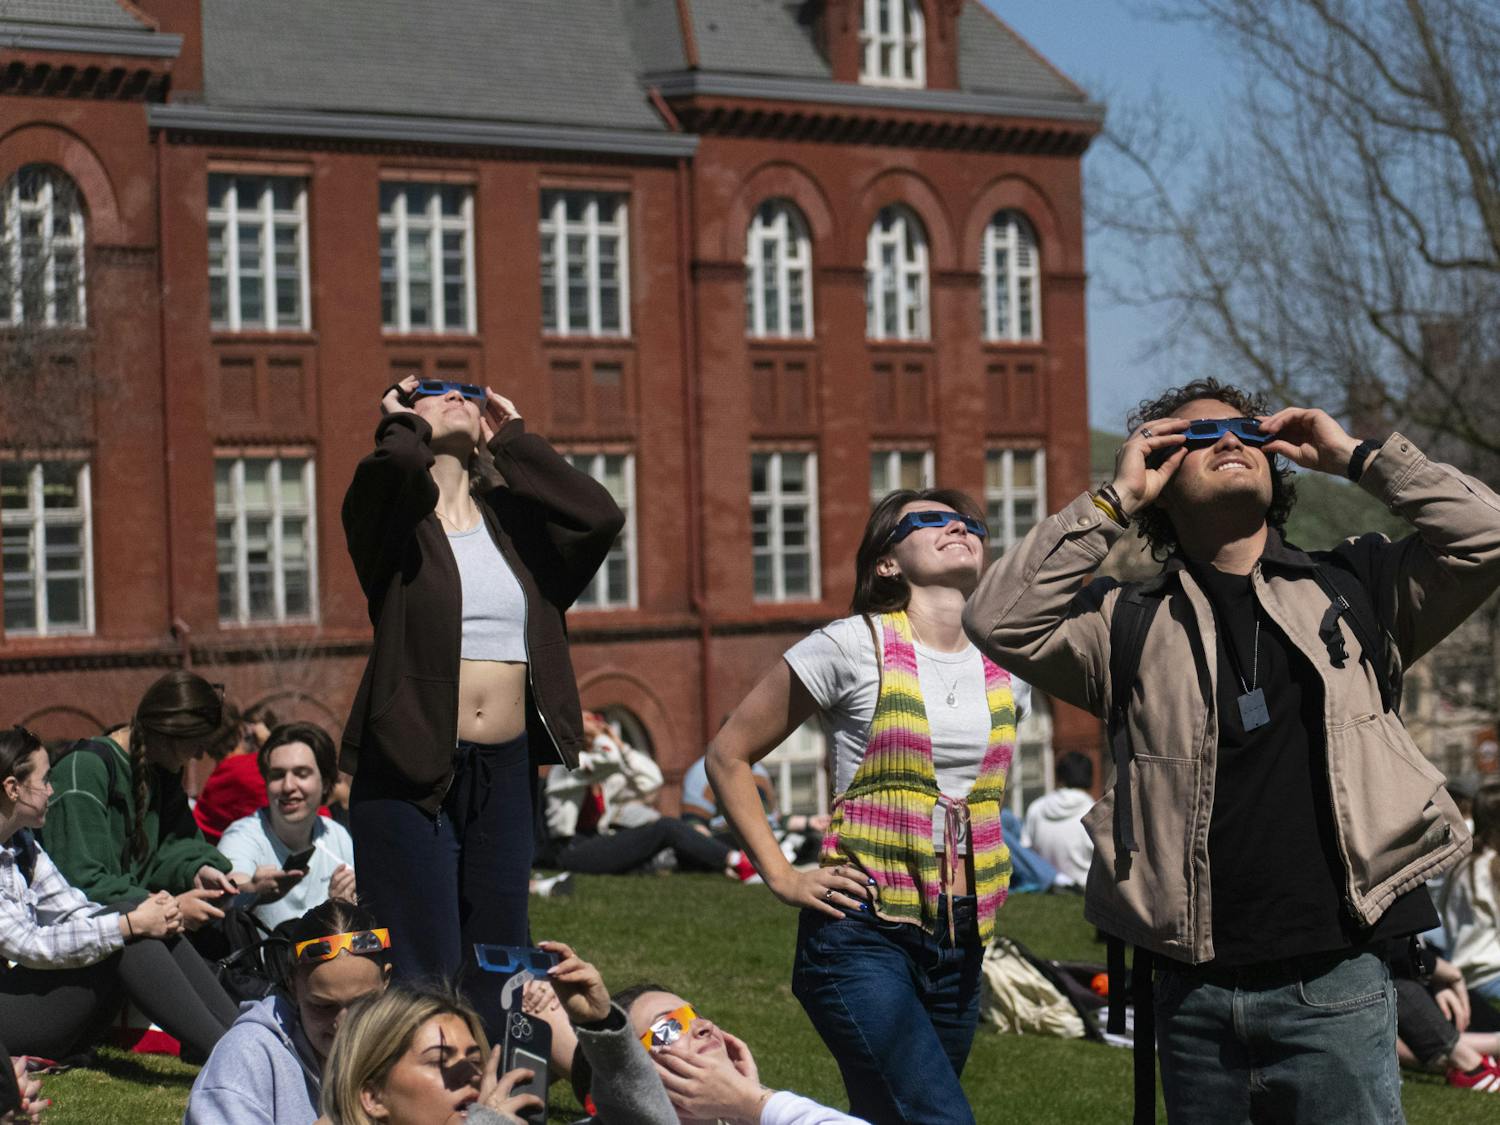 PHOTOS: See the solar eclipse from the UW-Madison perspective